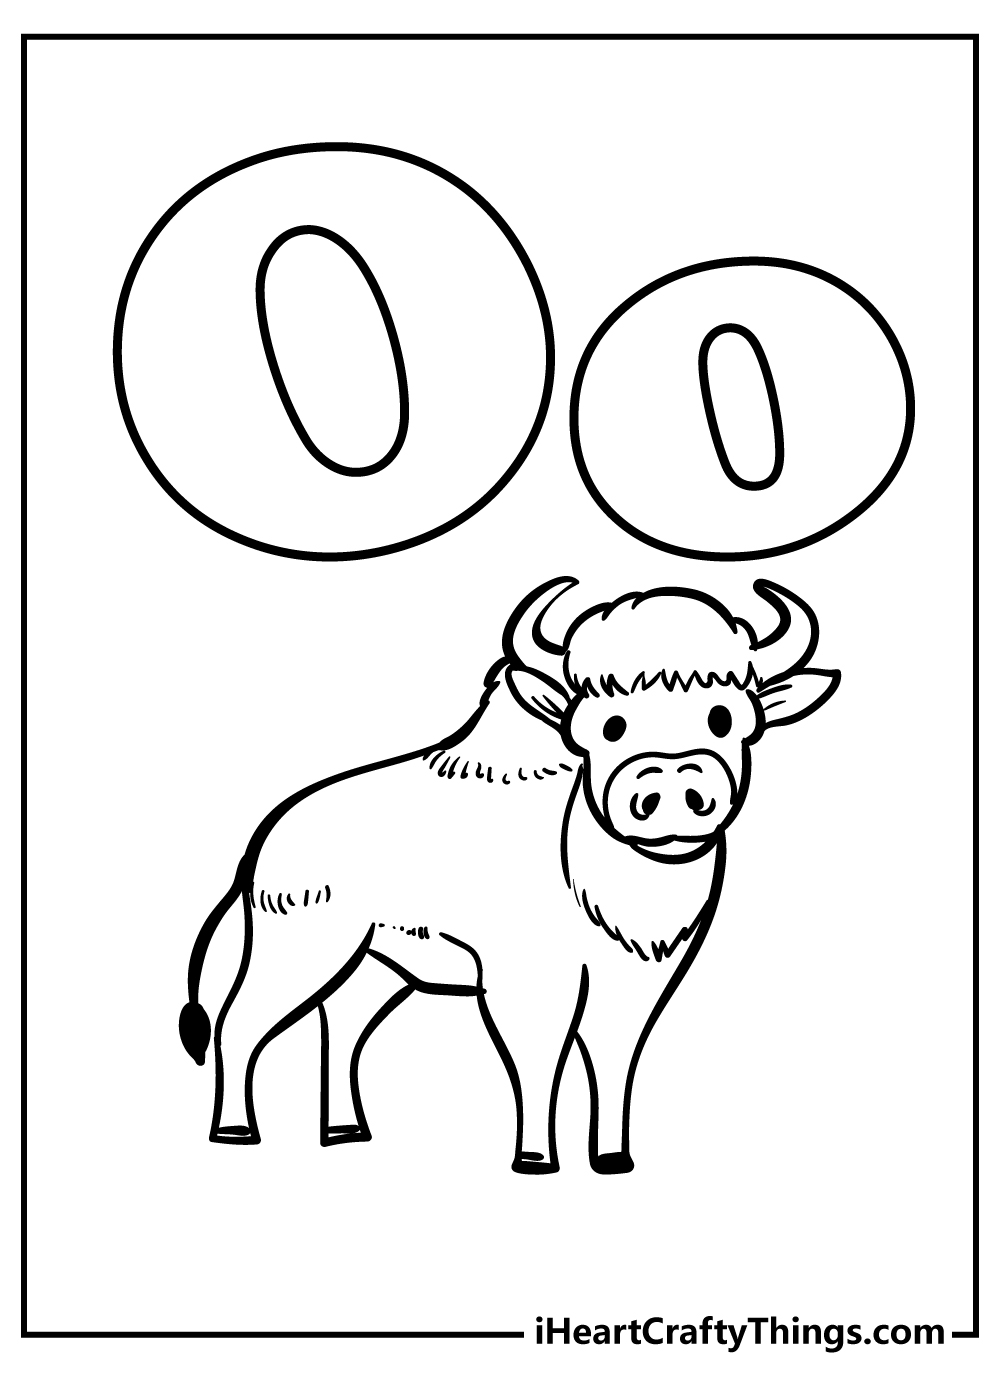 Letter O Coloring Pages for kids free download